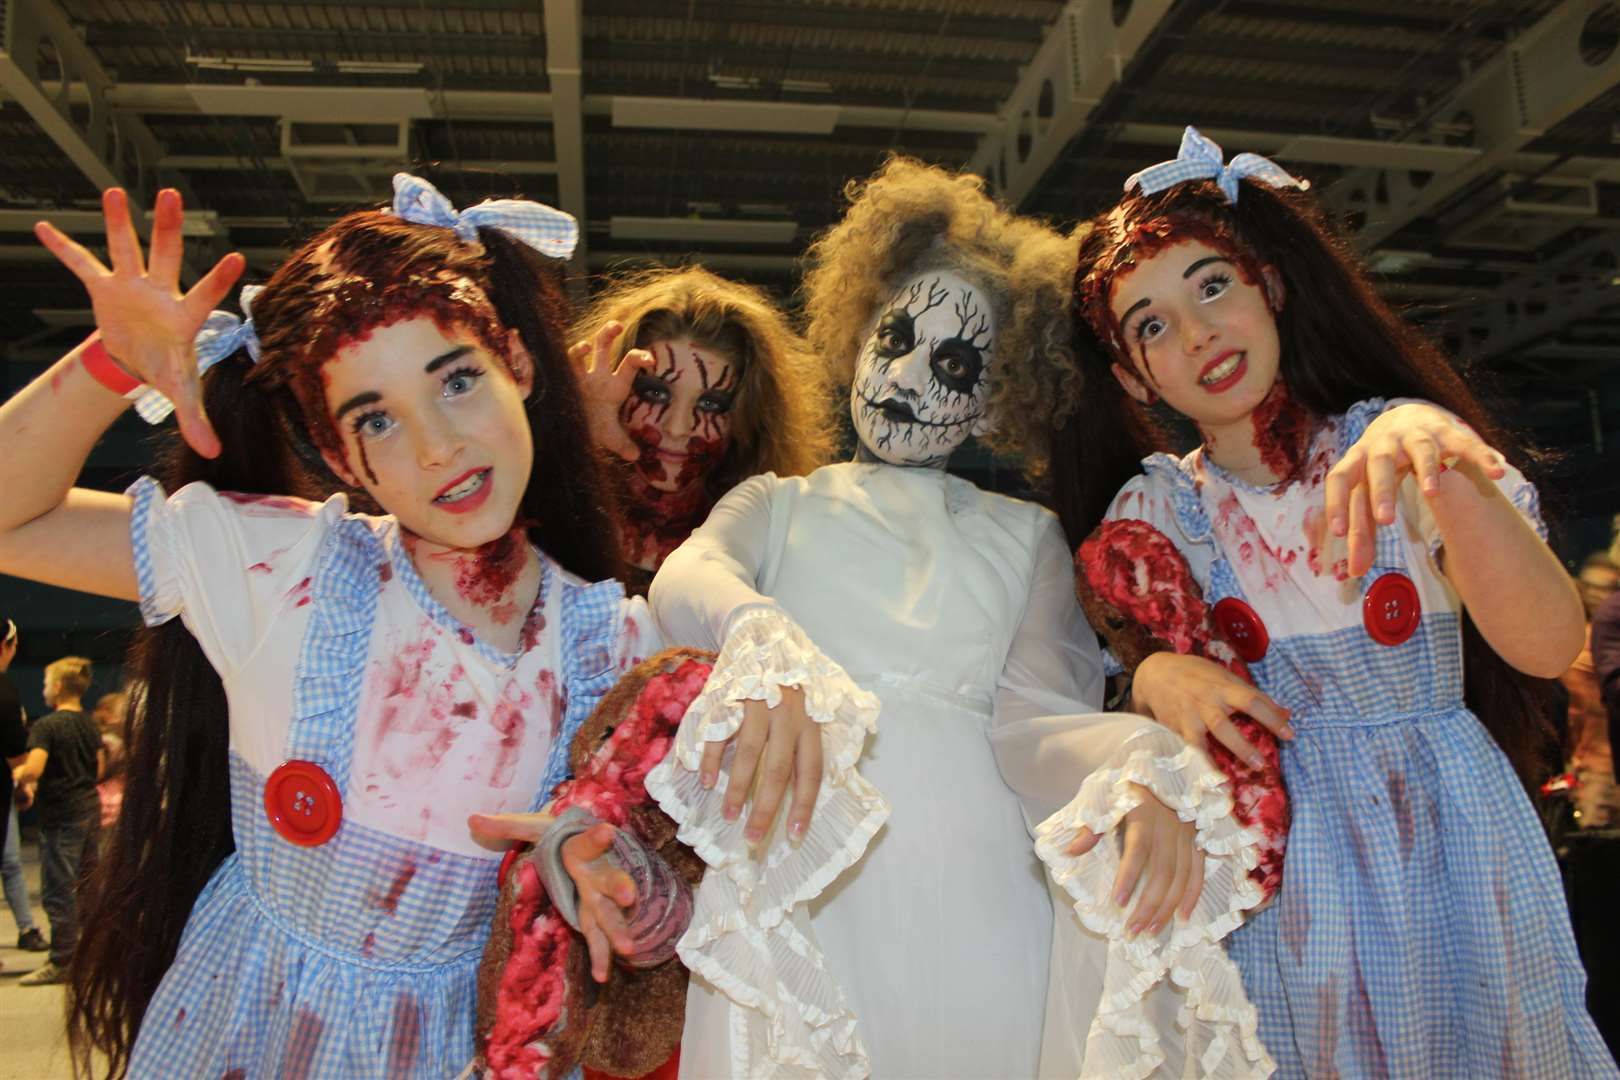 Ghoul friends: Twins Rhianna and Rayleigh Lonergan, 12, Jessica Clements and Tamuka Cross, both 11, spent two hours in make-up